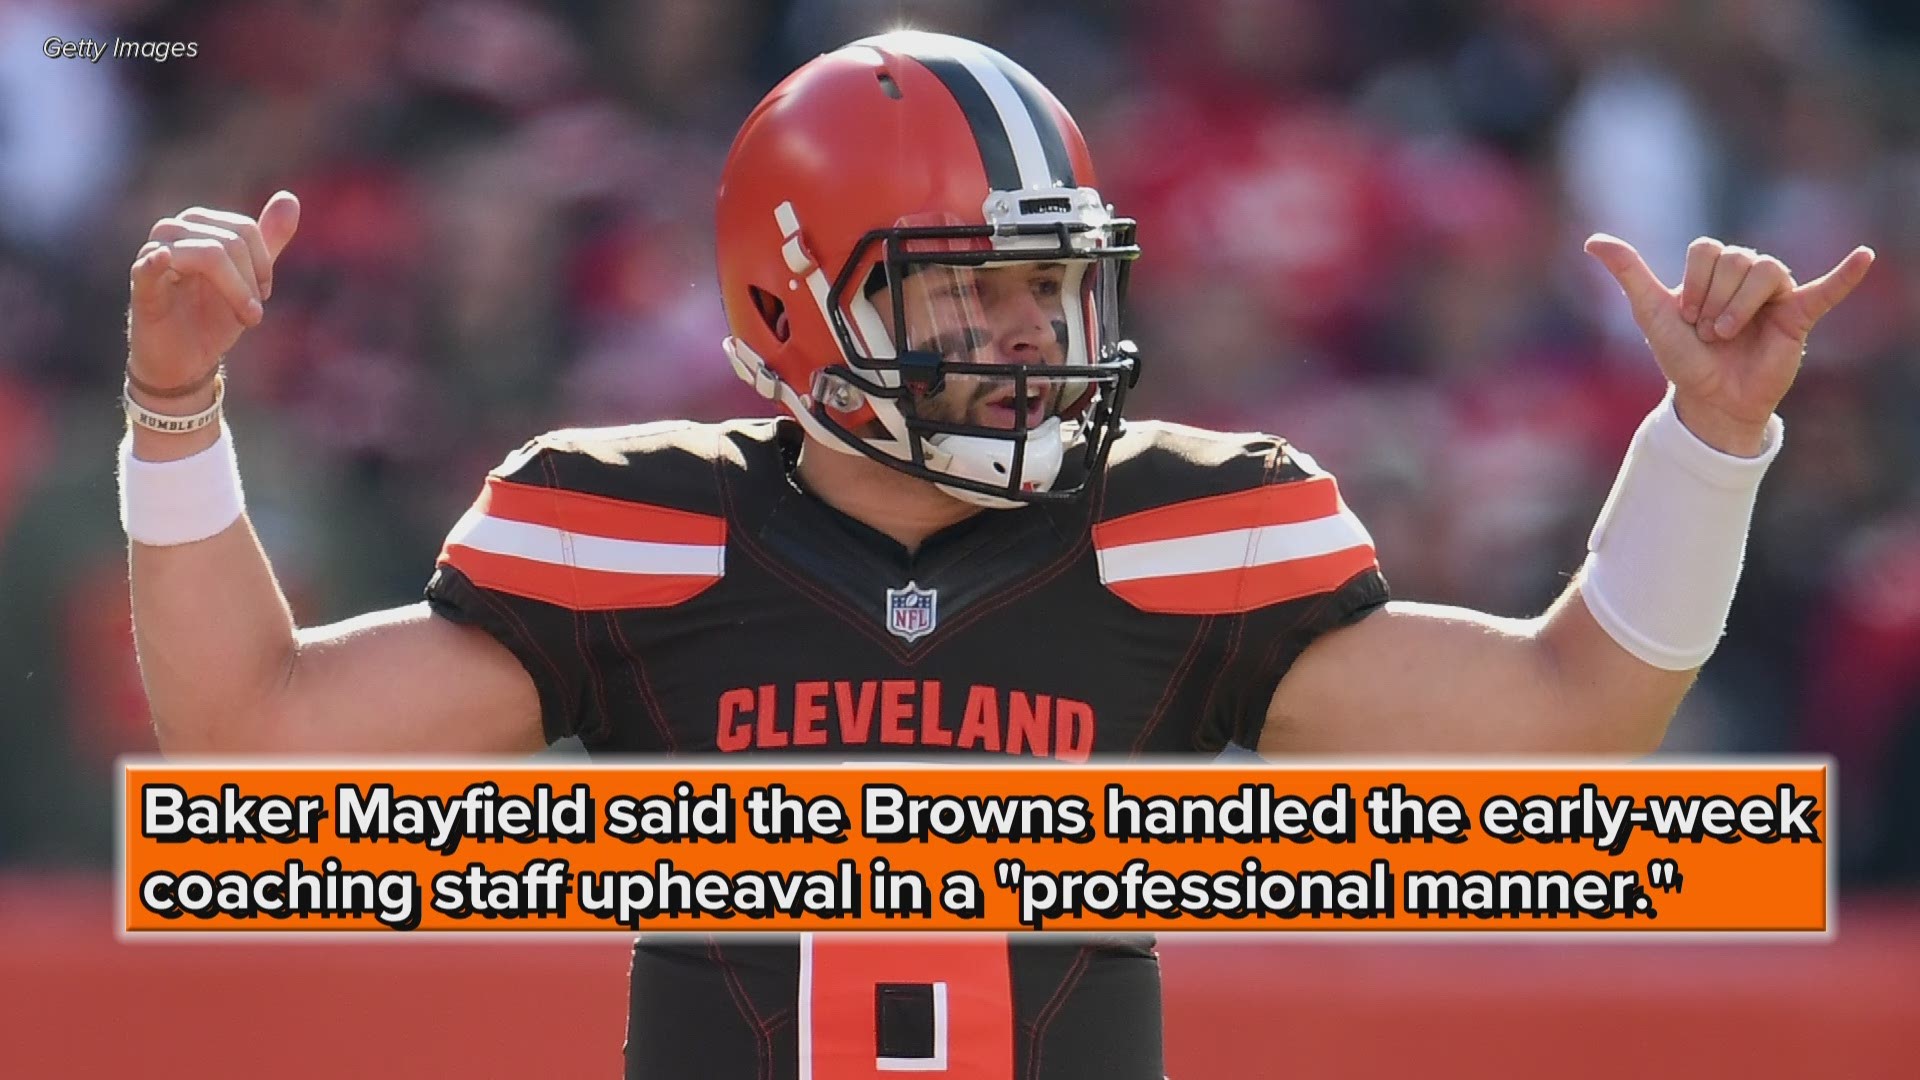 Baker Mayfield: Cleveland Browns handled coaching staff upheaval in 'professional manner'